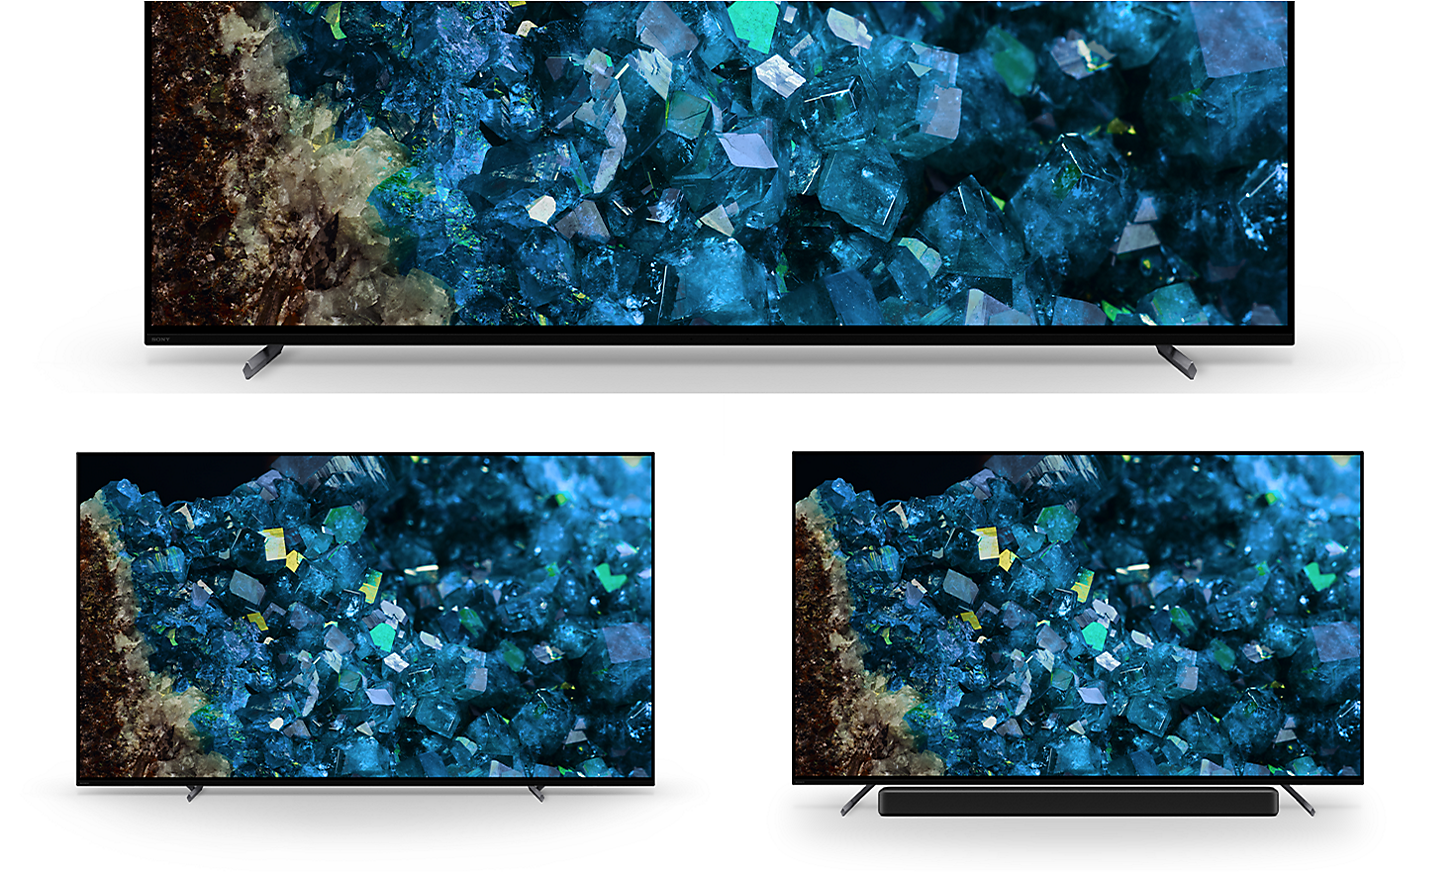 Image of three A80L Series BRAVIA TVs showing stand in standard setting, narrow setting and soundbar setting